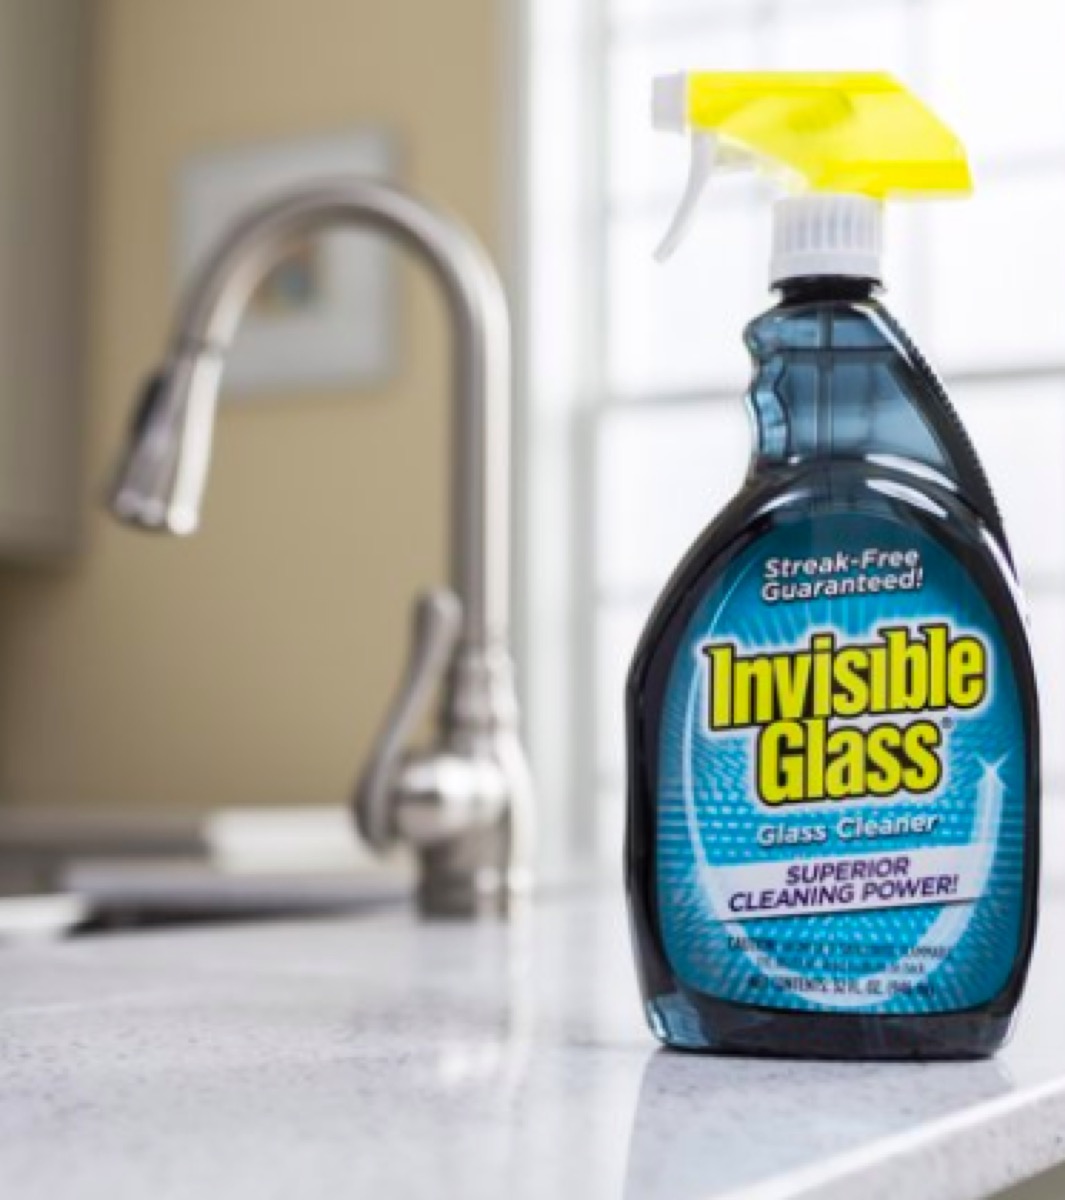 Invisible glass spray cleaner